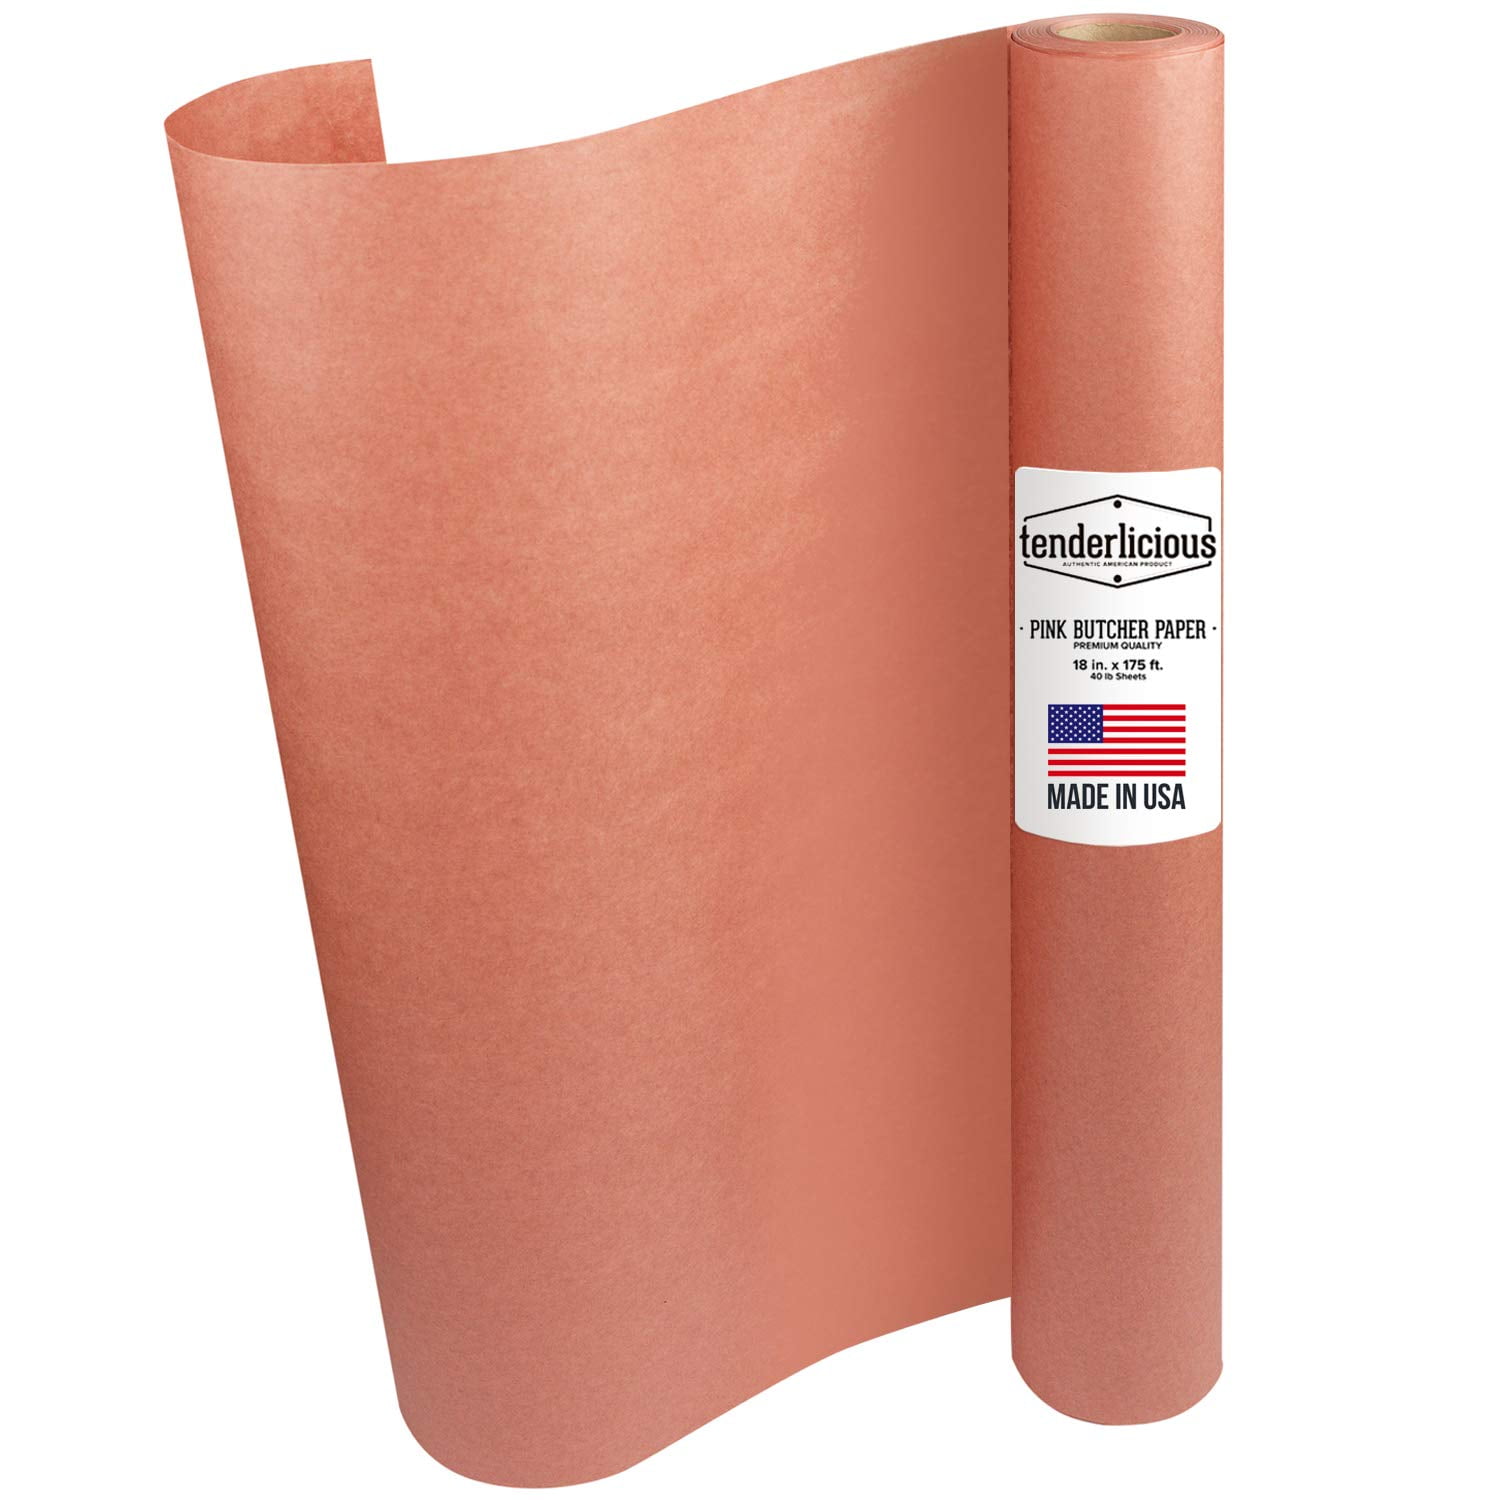 PaperMi All Natural, Kraft Pink Butcher Paper Roll - 18 x 200 (2400) USA Made Peach Wrapping Paper for Beef Briskets, BBQ Meat Smoking